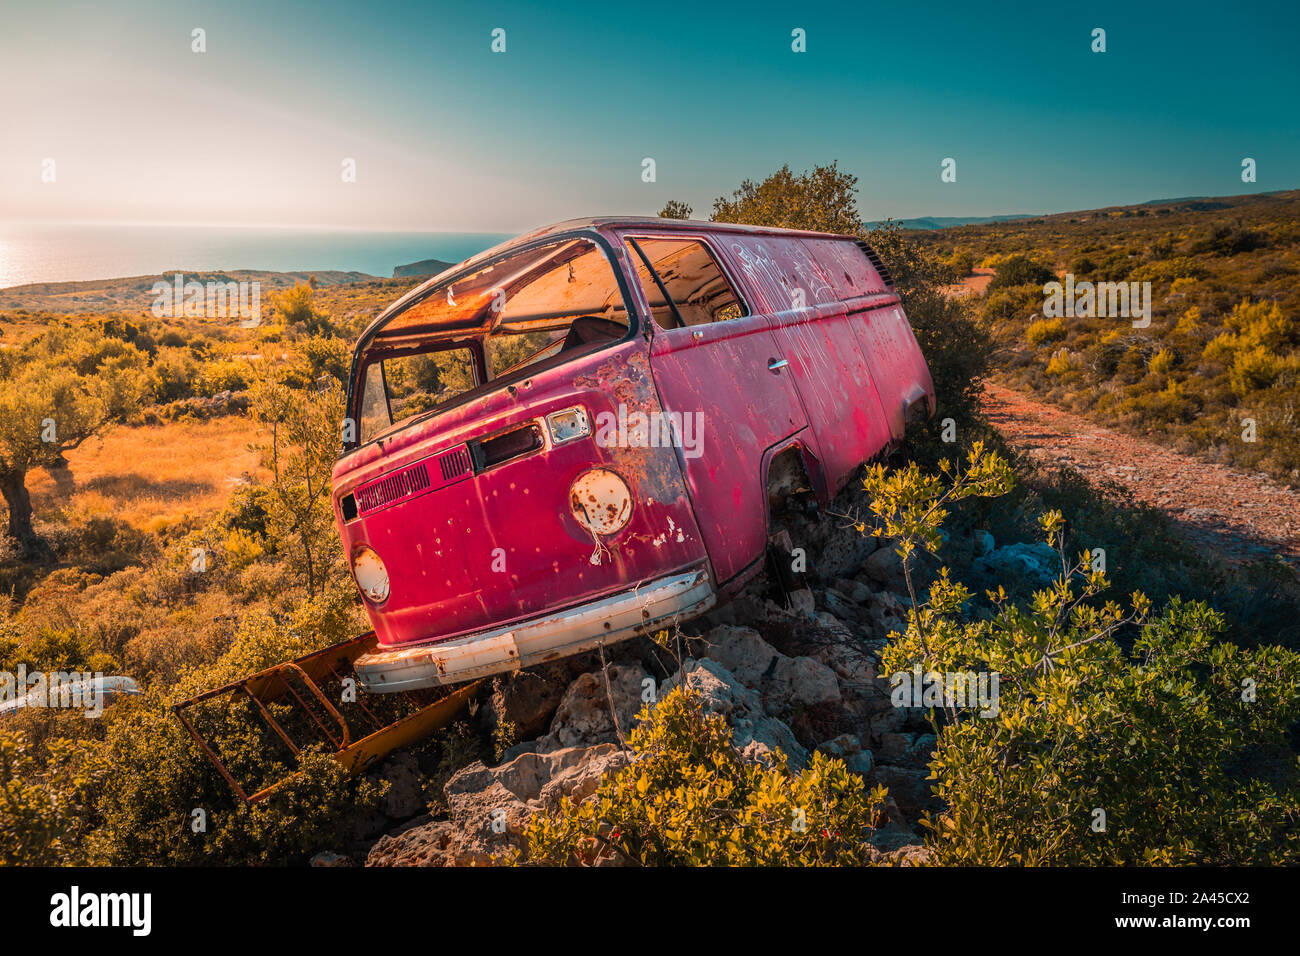 Abandoned van bus on the rocks in the middle of nowhere on a sunny day. Sea in the background. Stock Photo